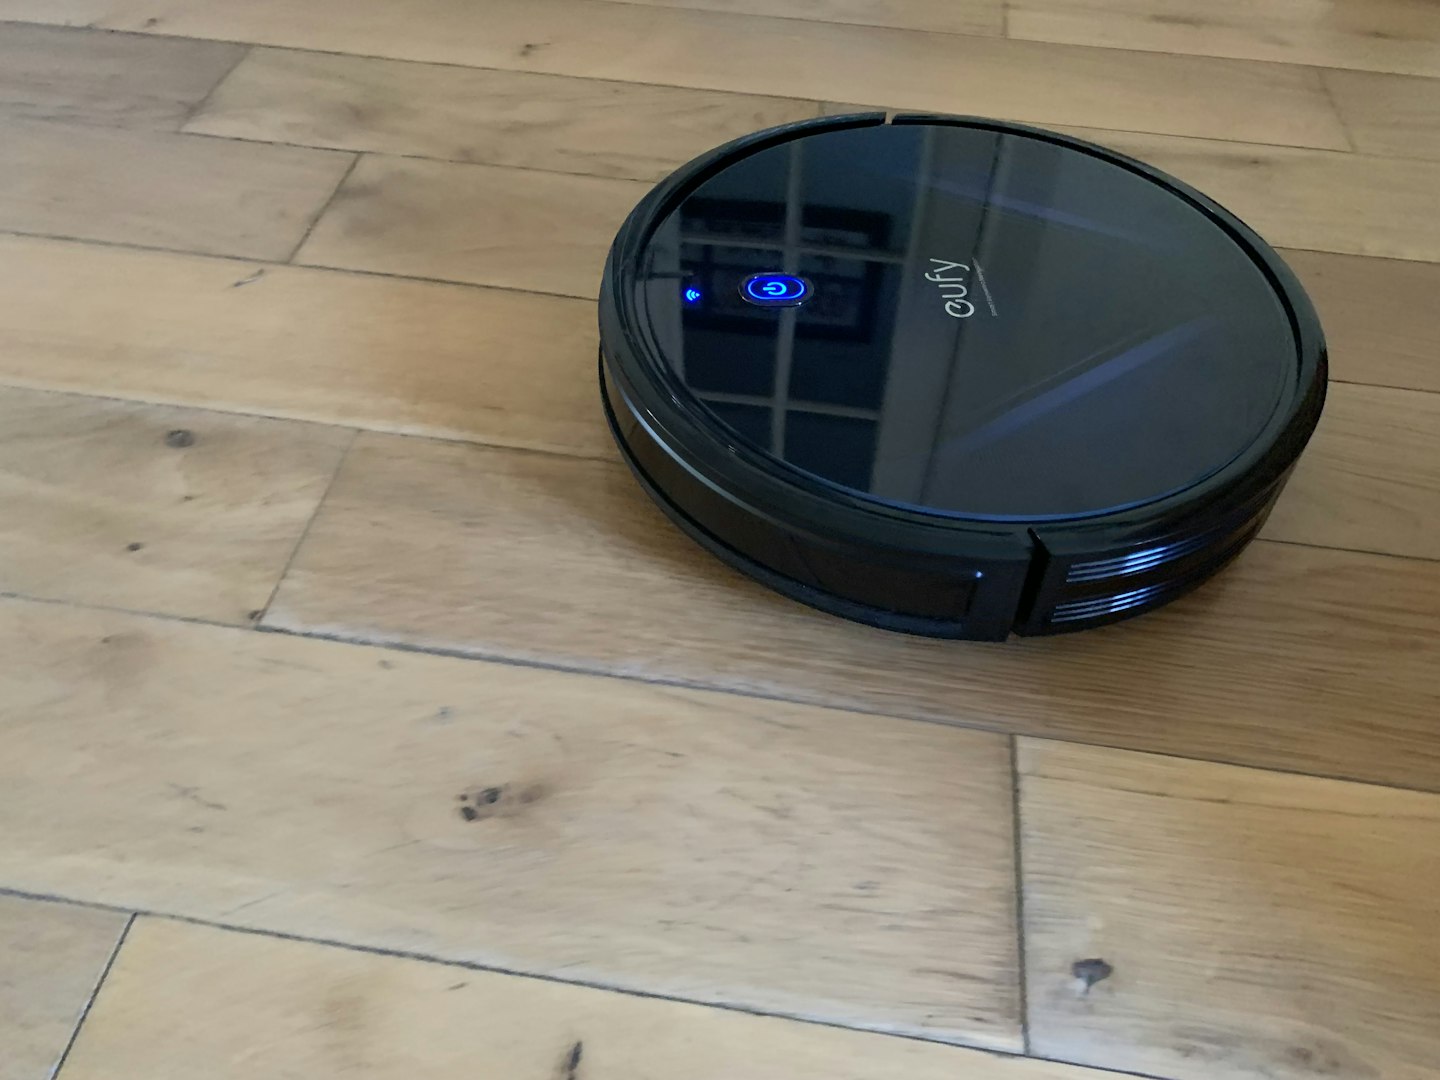 view of the G20 Robovac in action on a wooden hard floor.